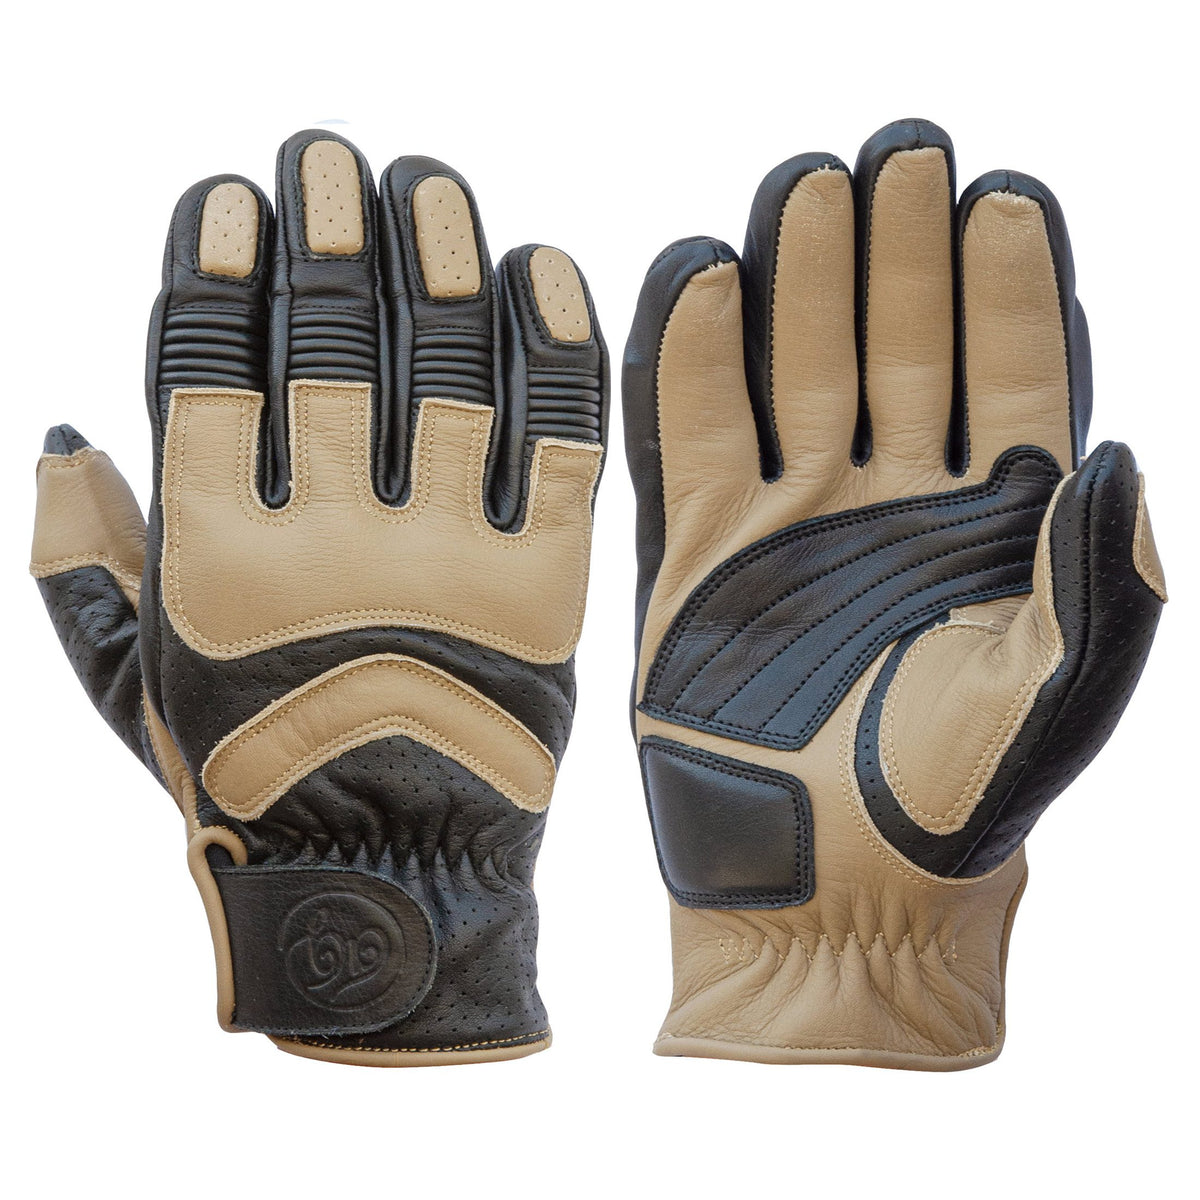 Age of Glory Hero Leather CE Gloves Black Sand